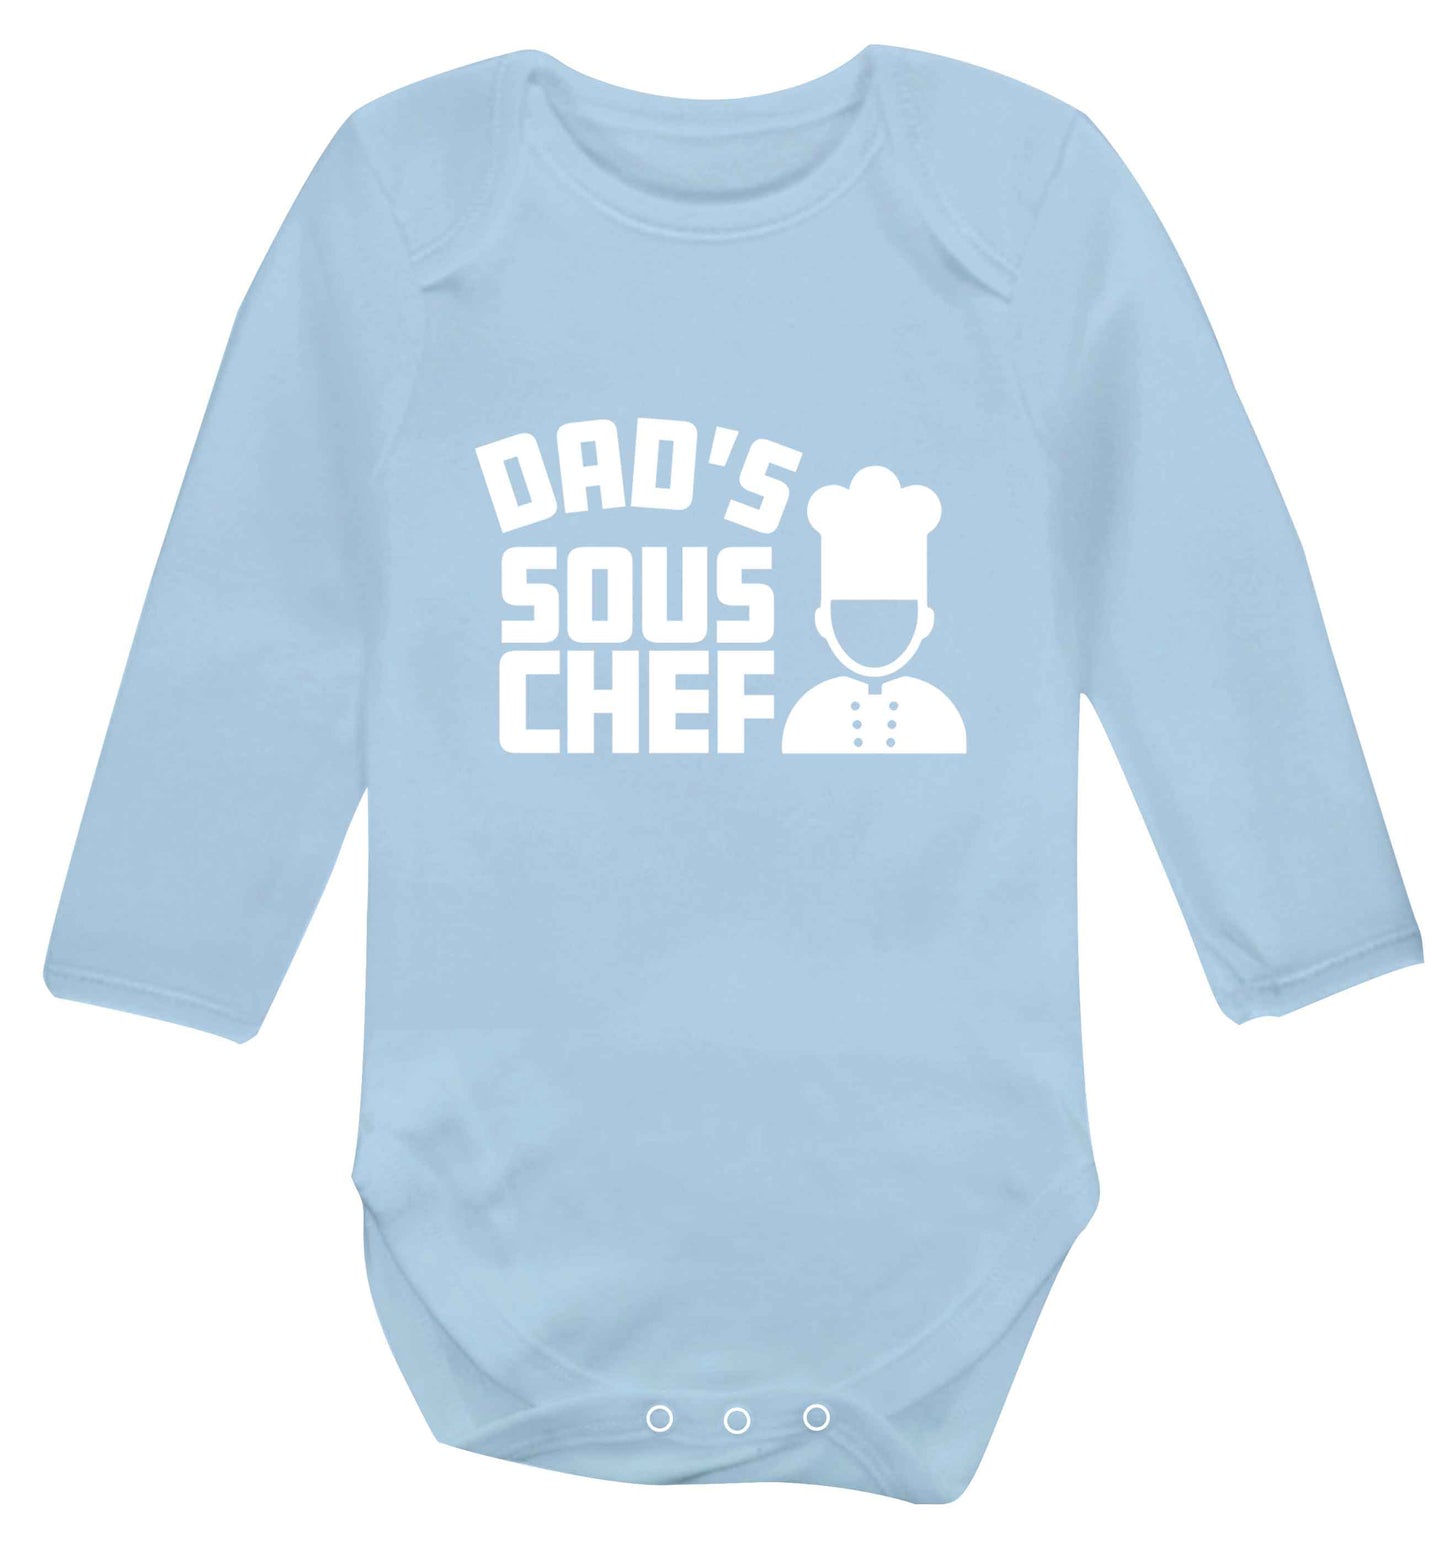 Dad's sous chef baby vest long sleeved pale blue 6-12 months